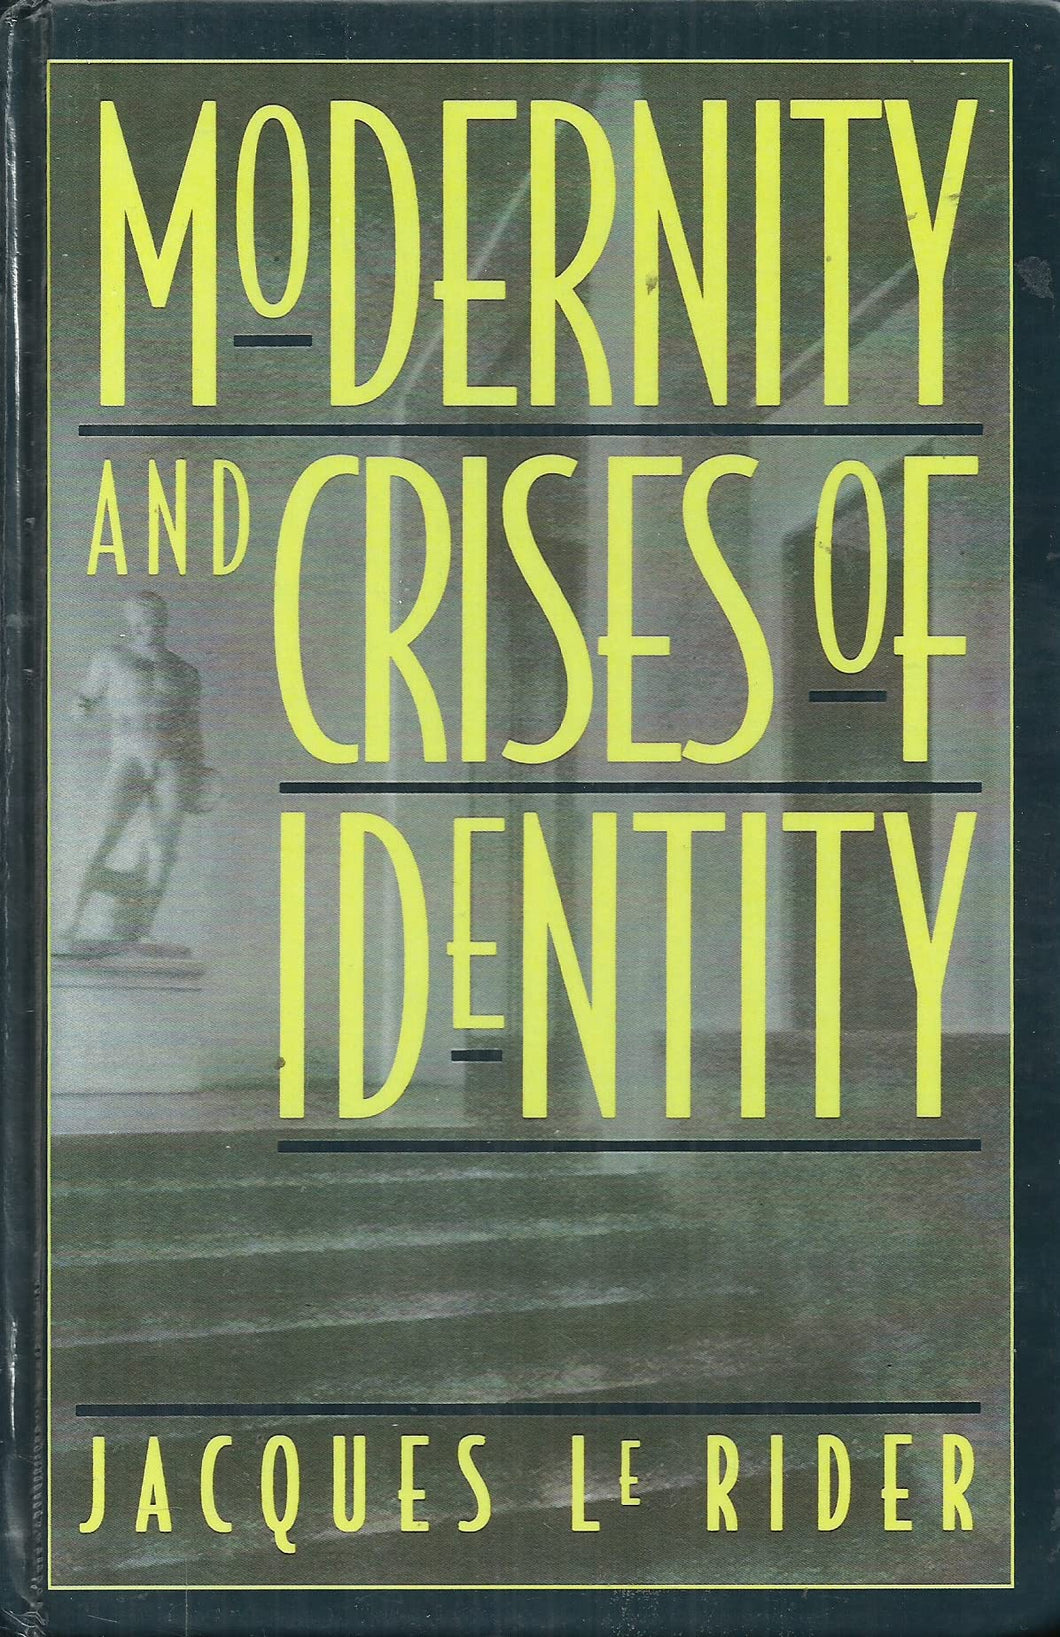 Modernity and Crises of Identity: Culture and Society in Fin-de-siecle Vienna